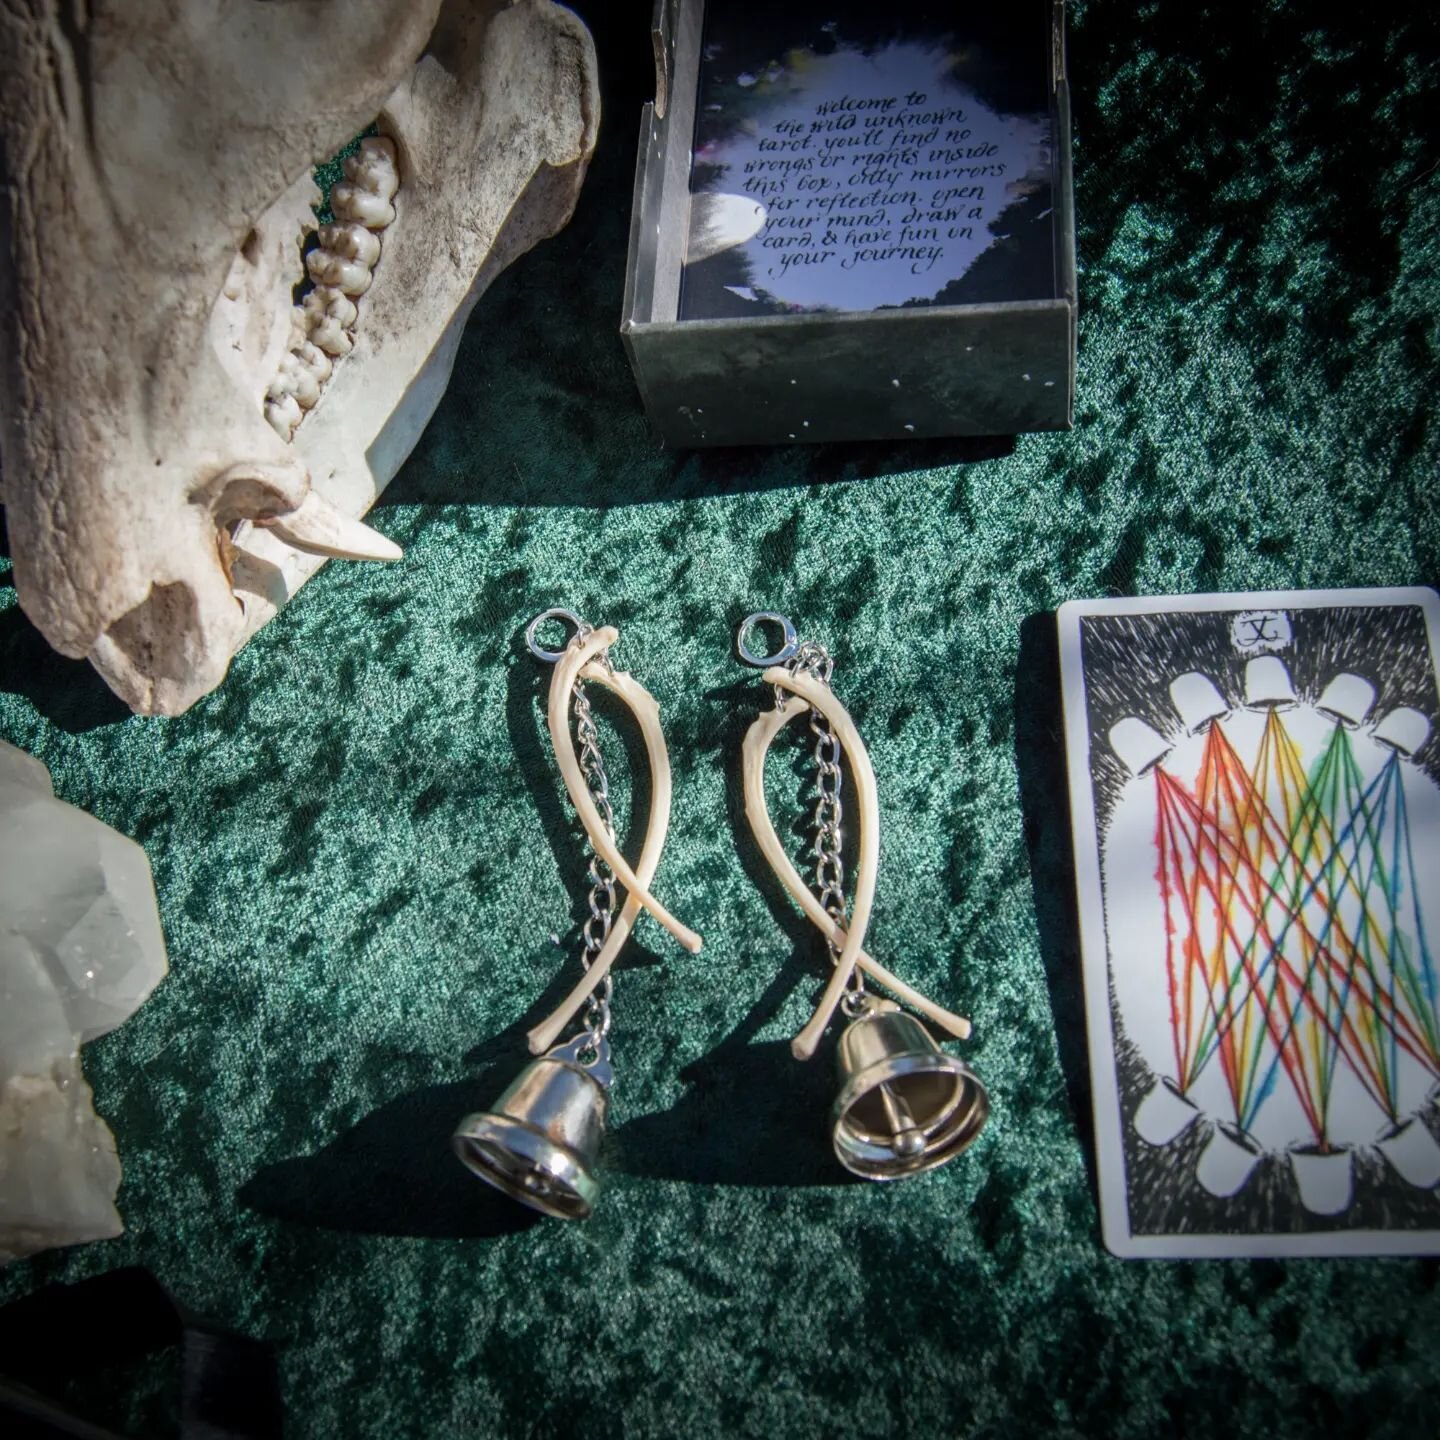 Ten of cups⭐☕

These hangers are perfect for those with &quot;regular&quot; or stretched ear holes. They're made lovingly with domestic cat ribs and recycled bells. These earrings are talismans for celebration. Find sacred play in your life and grati